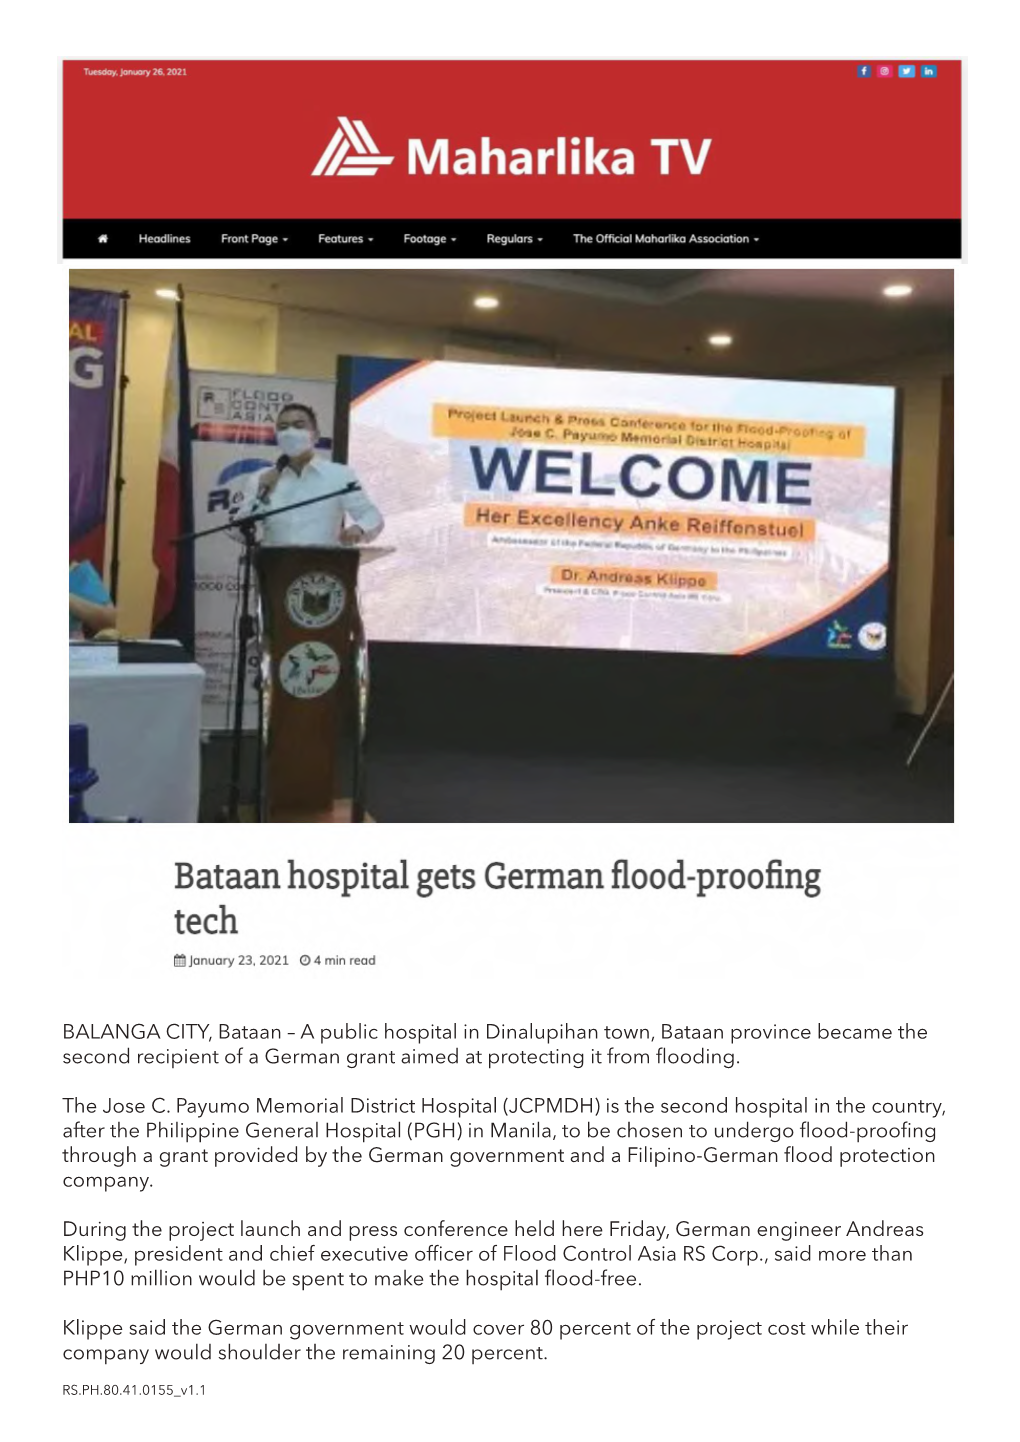 BALANGA CITY, Bataan – a Public Hospital in Dinalupihan Town, Bataan Province Became the Second Recipient of a German Grant Aimed at Protecting It from Flooding